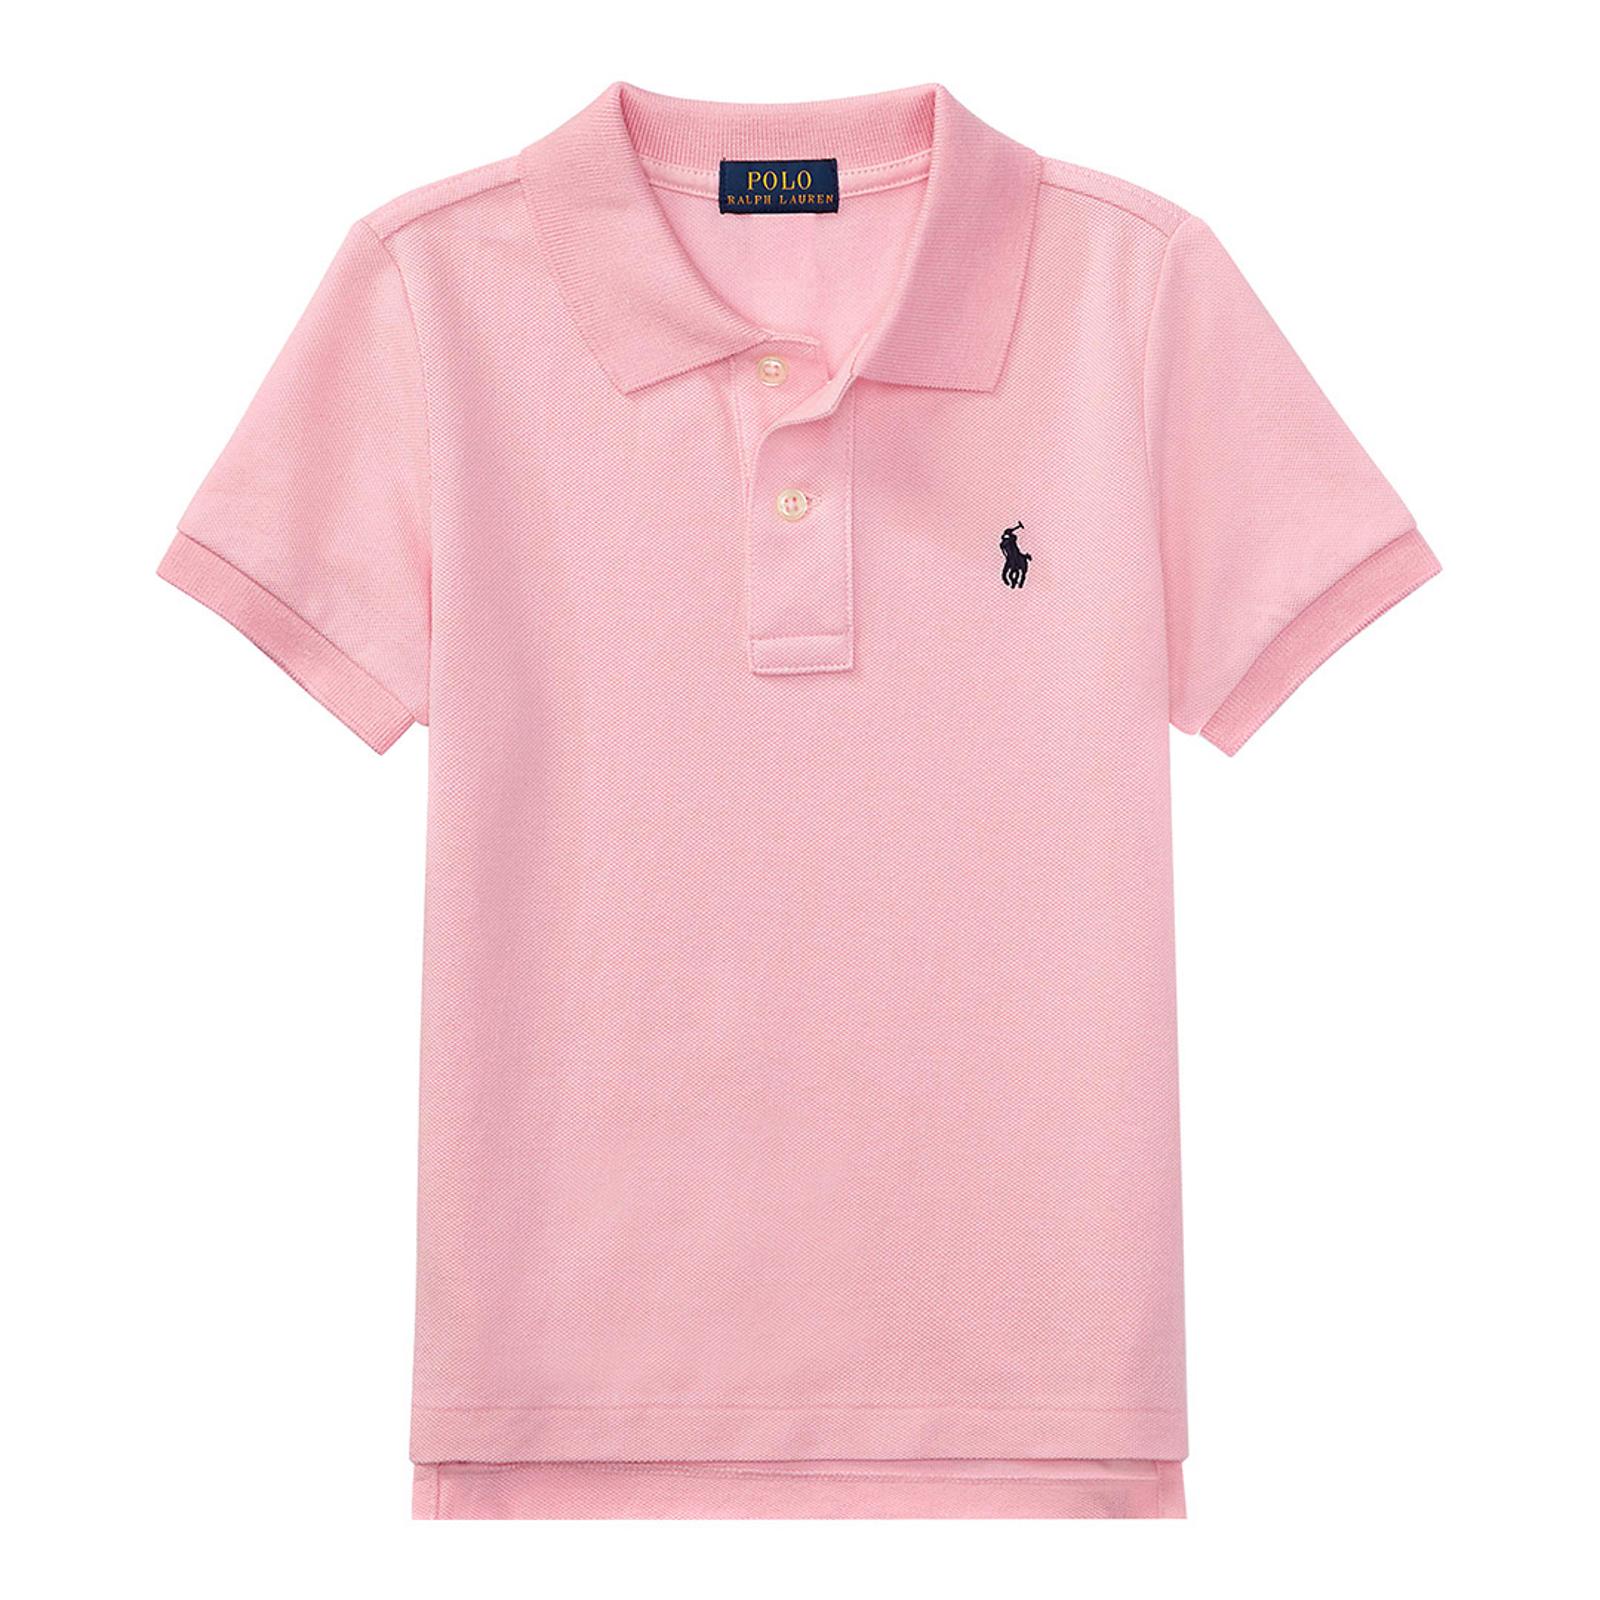 Younger Boy's Pink Cotton Polo Shirt - BrandAlley